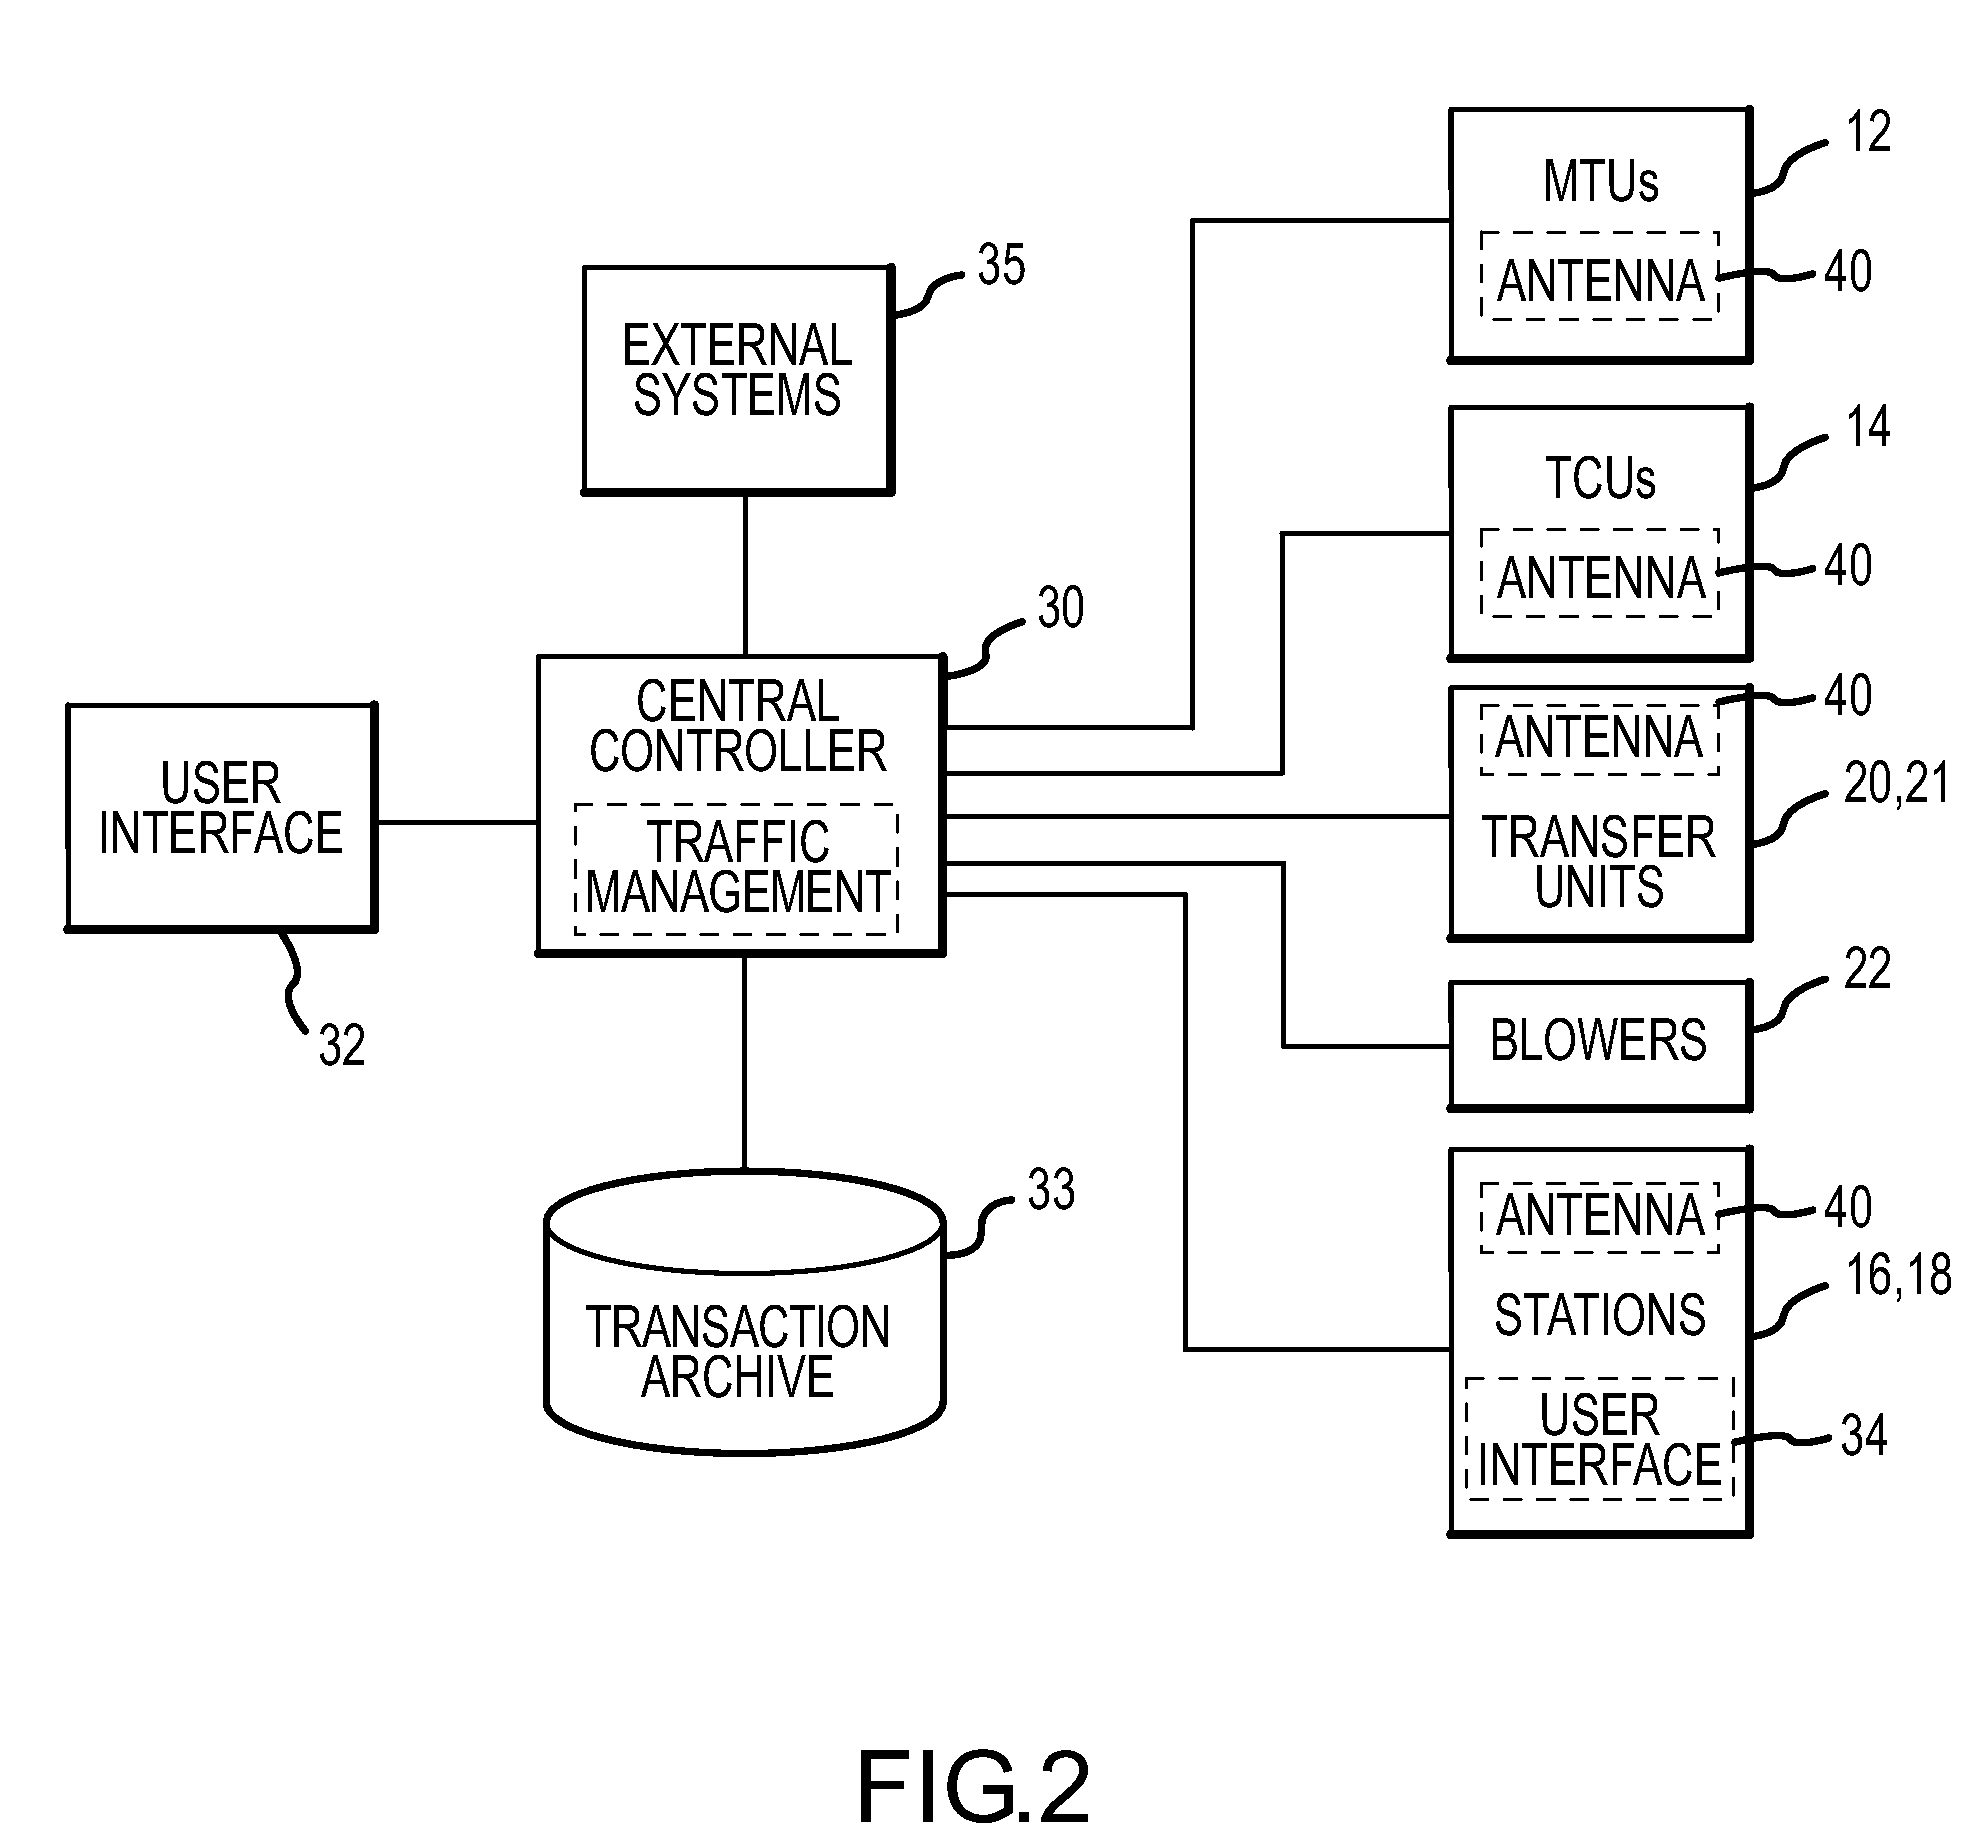 System and method for carrier identification in a pneumatic tube system